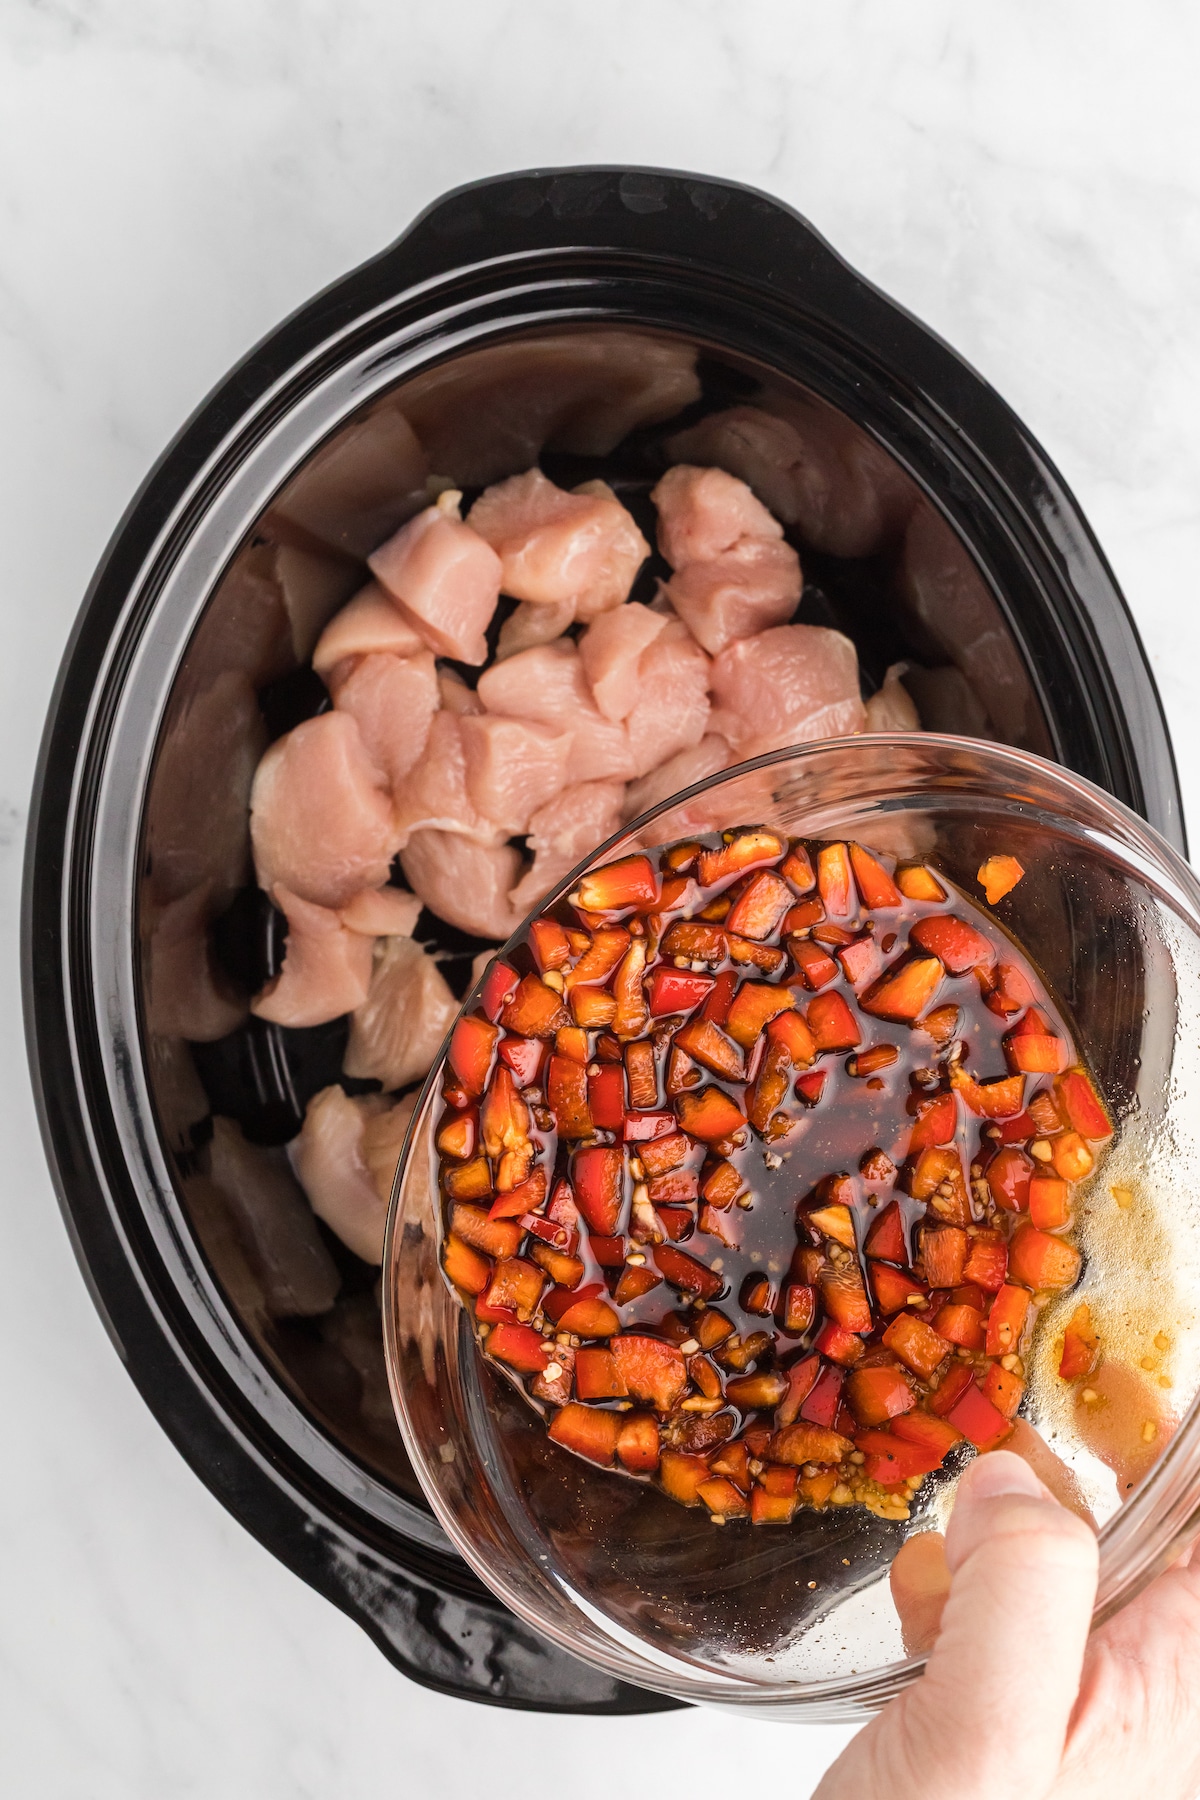 Teriyaki sauce being poured over chunks of chicken breast in a slow cooker